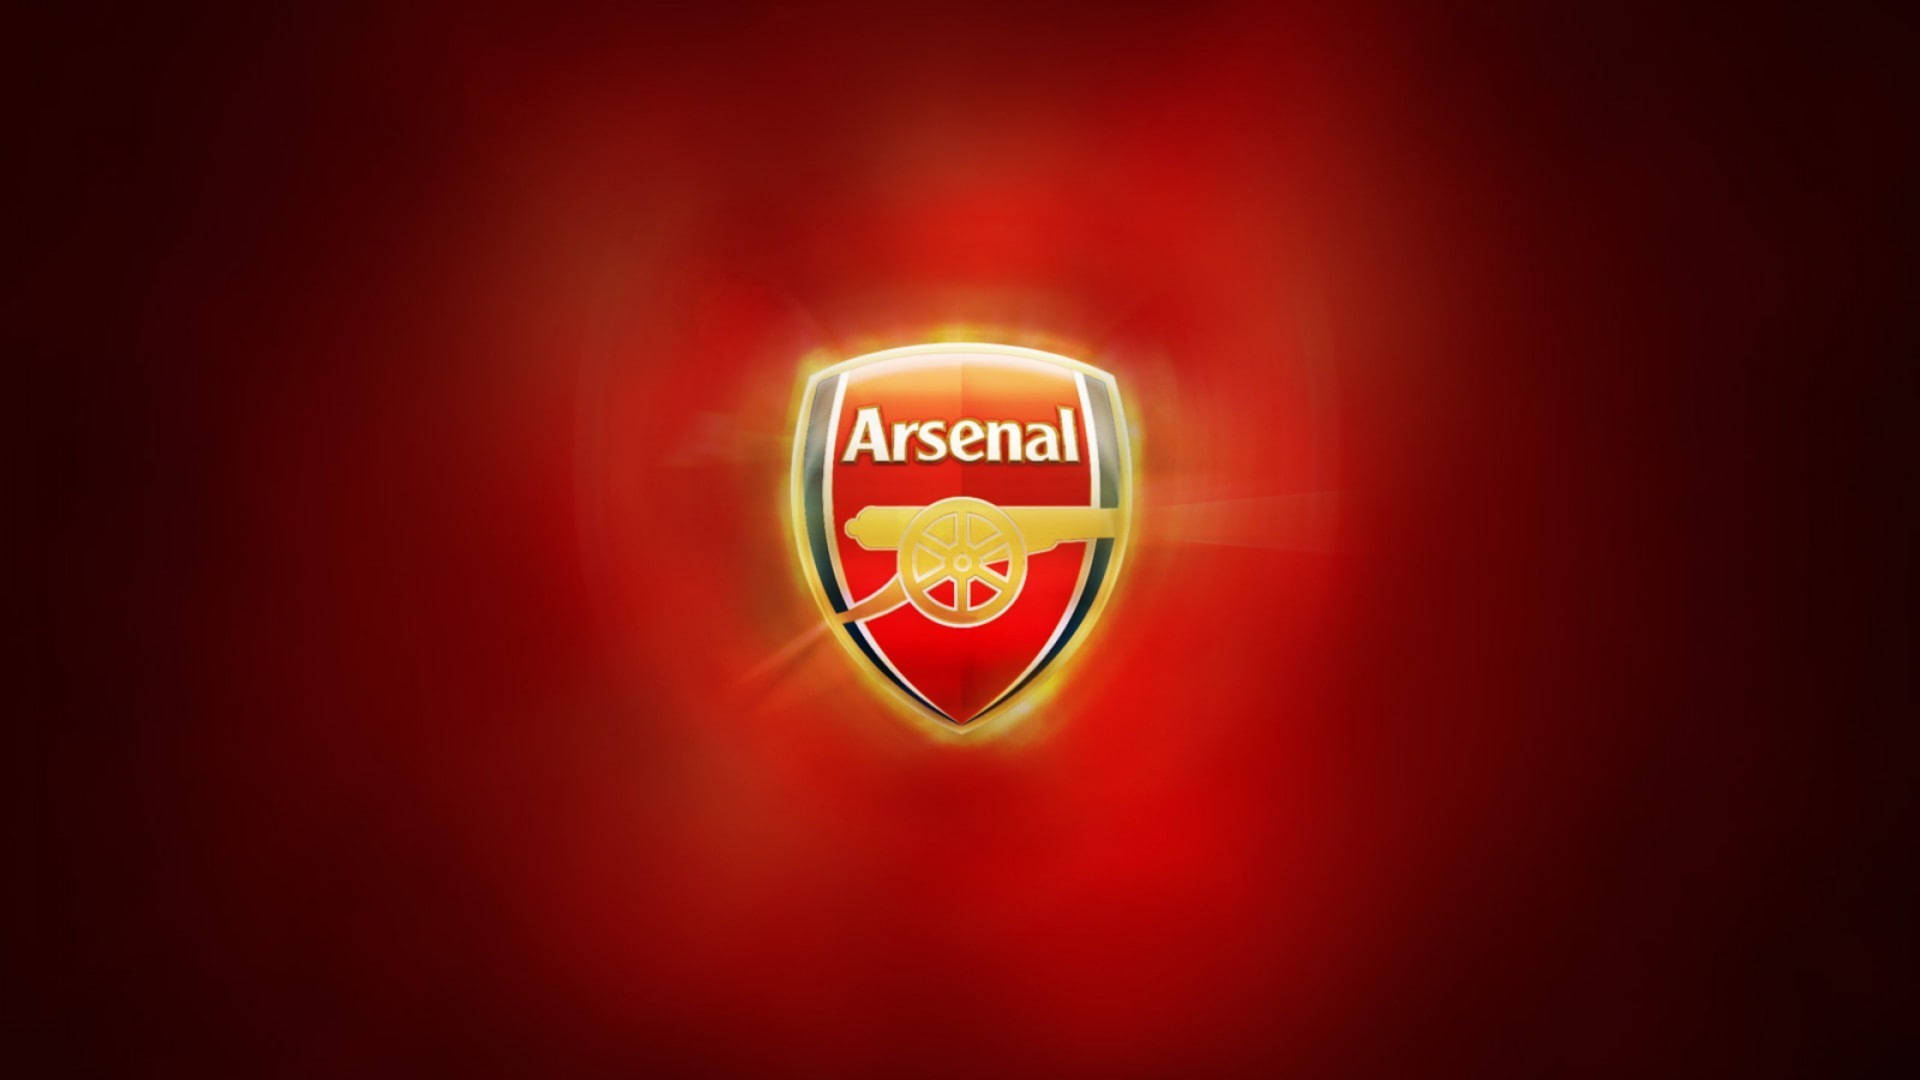 Arsenal In Red Aesthetic Background